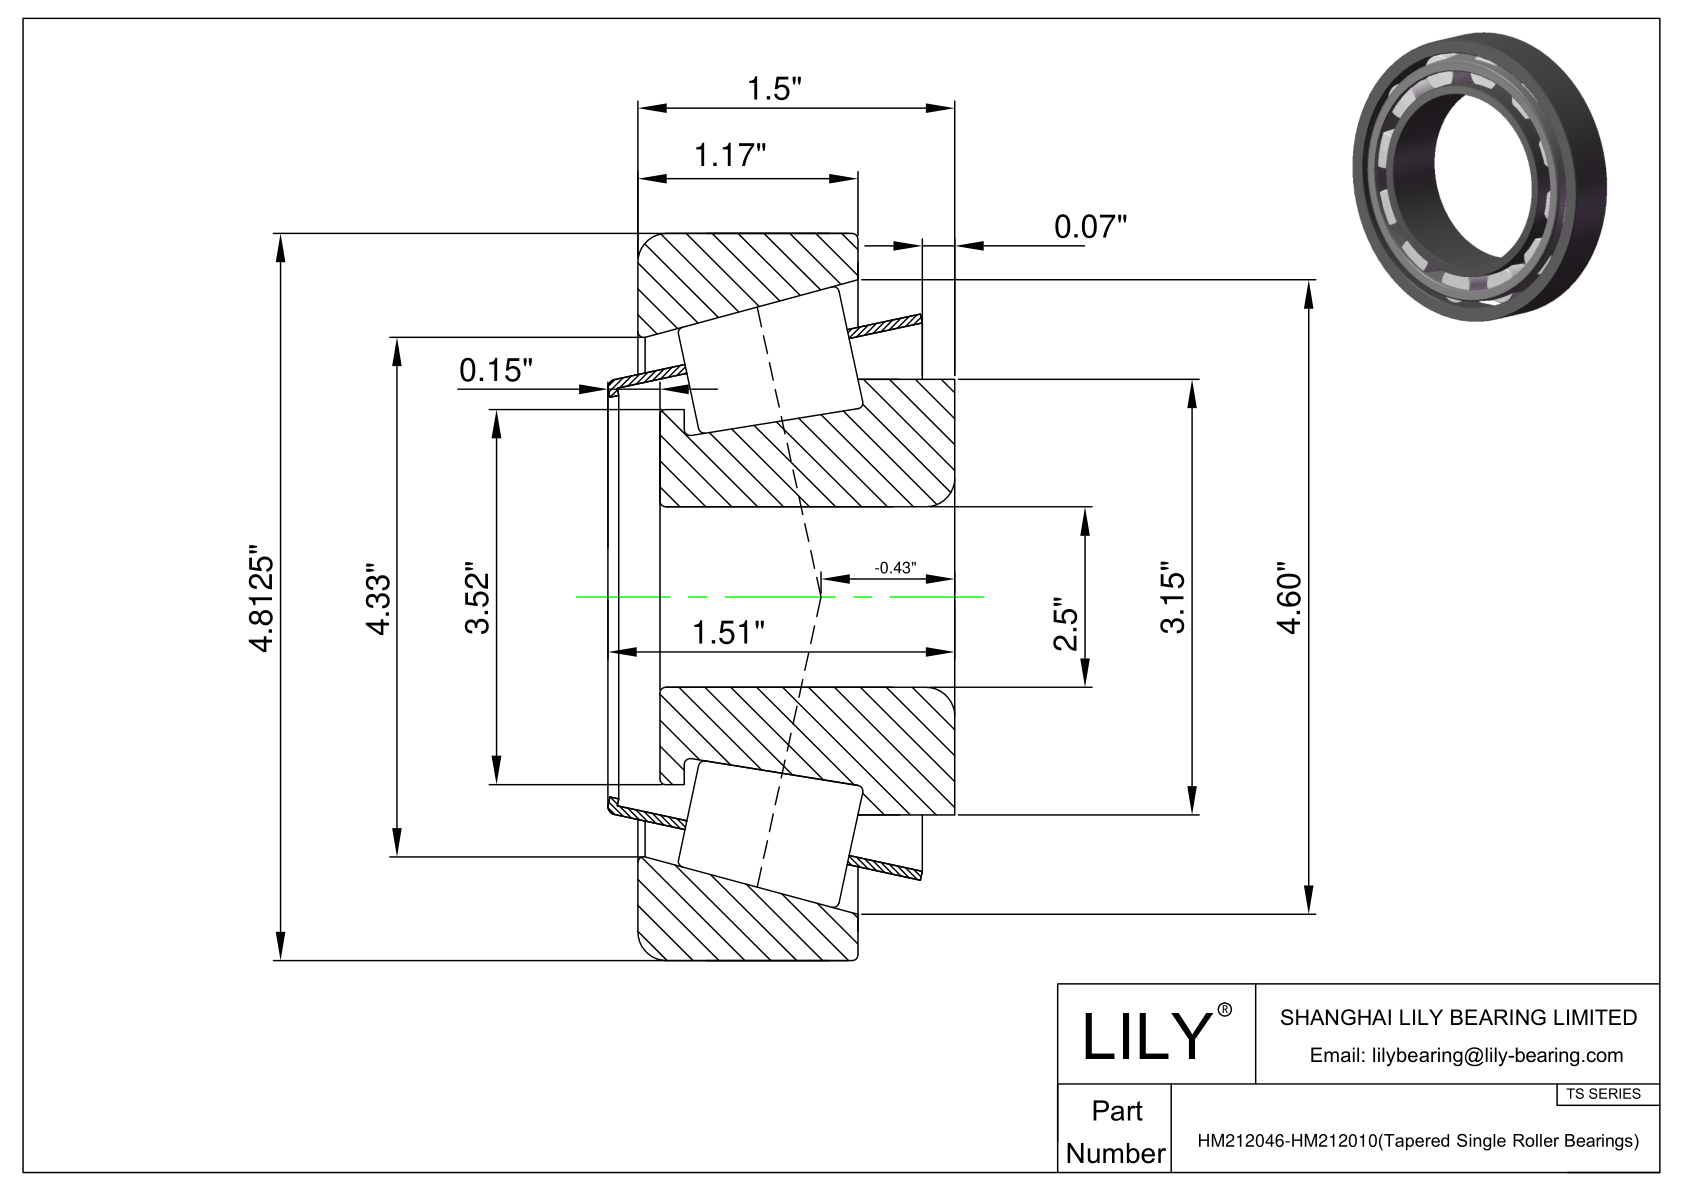 HM212046-HM212010 TS (Tapered Single Roller Bearings) (Imperial) cad drawing